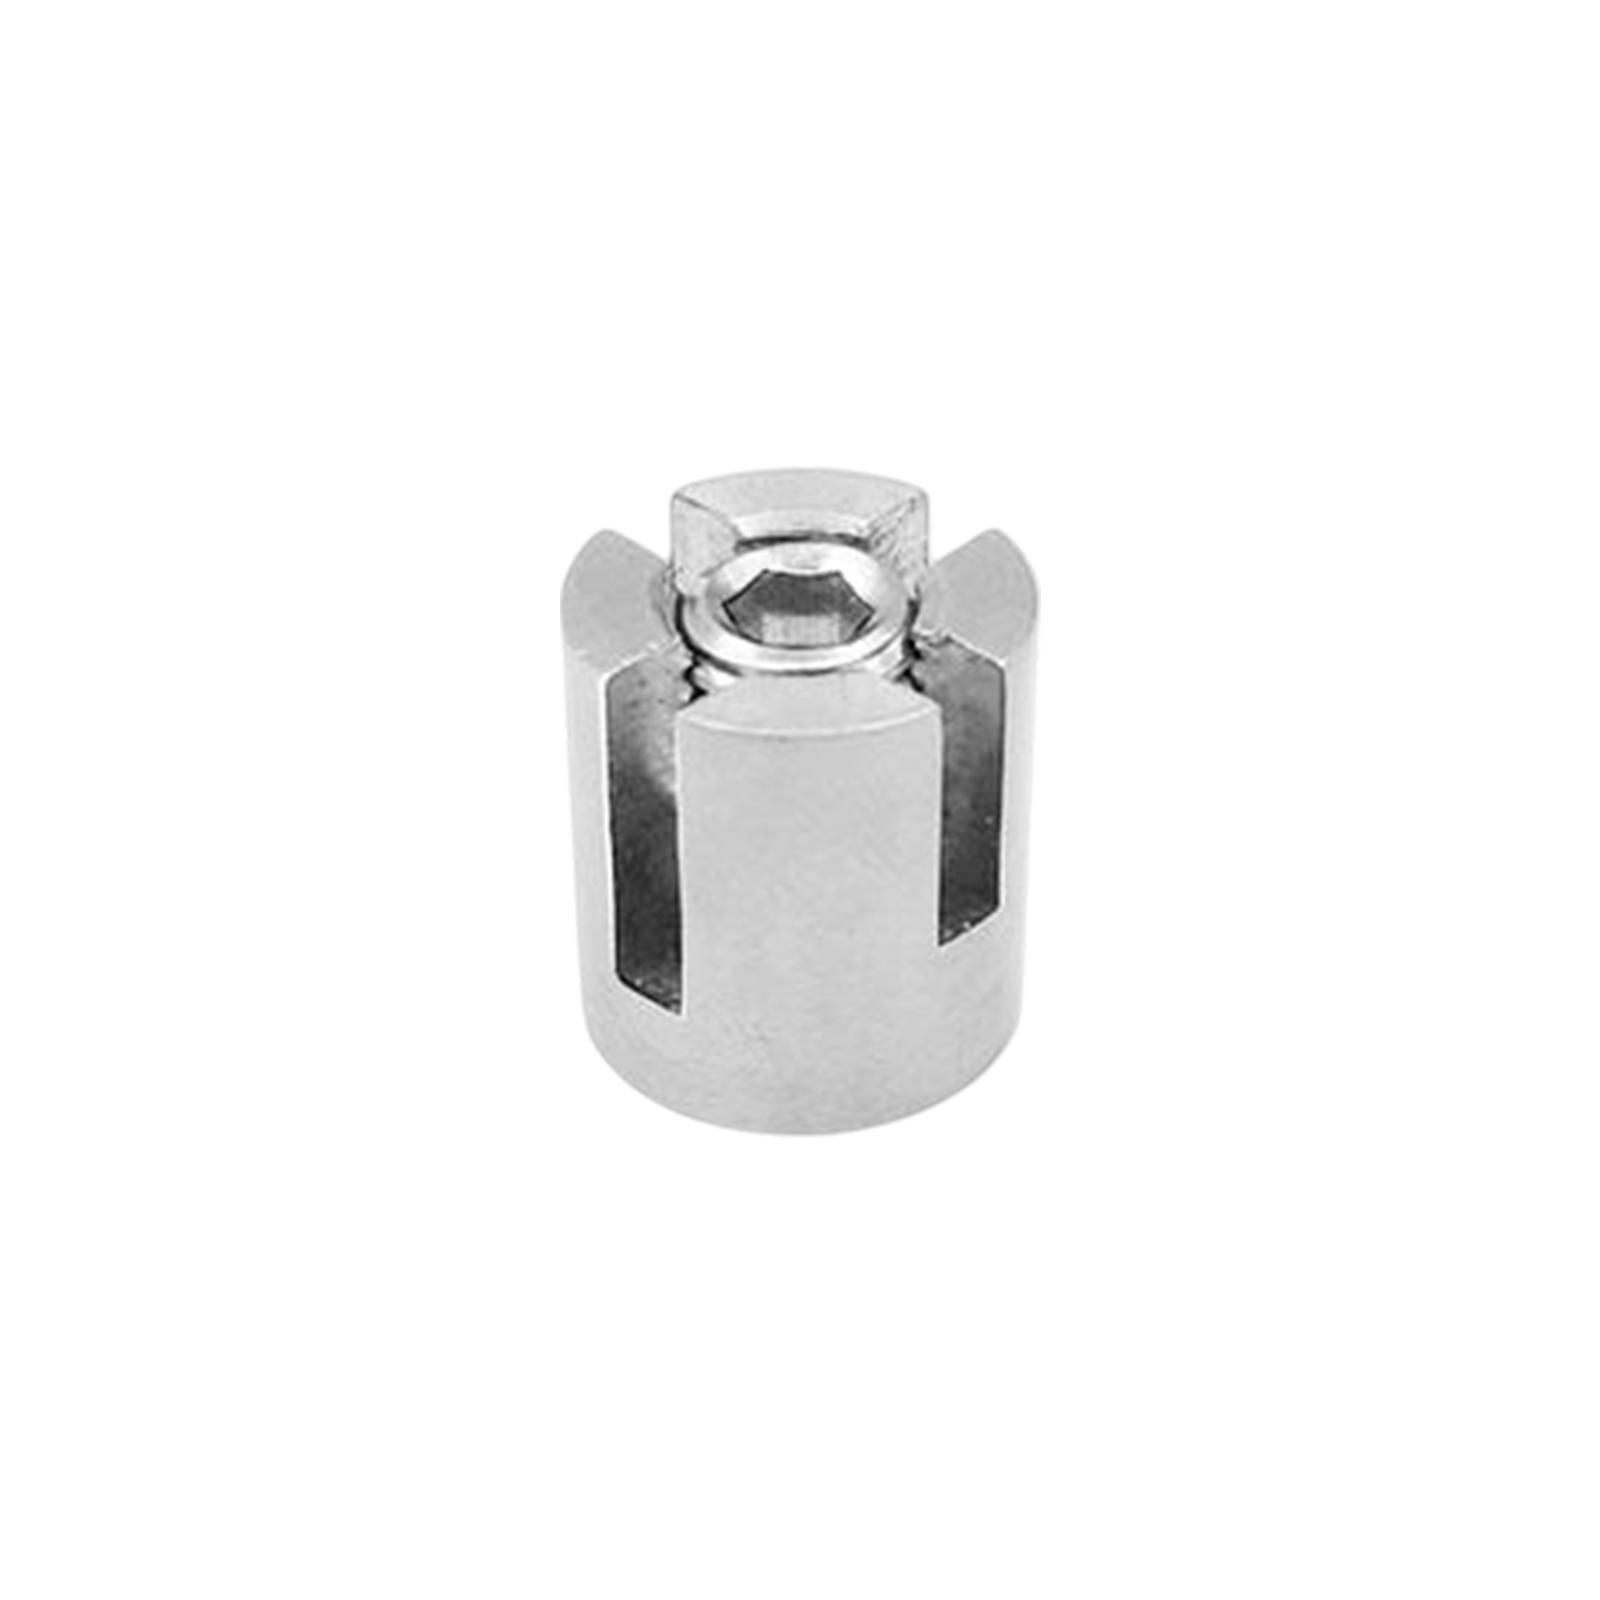 Stainless Steel Cross Cable Clamps Cross Clips Rope Clamp for Cable Railings